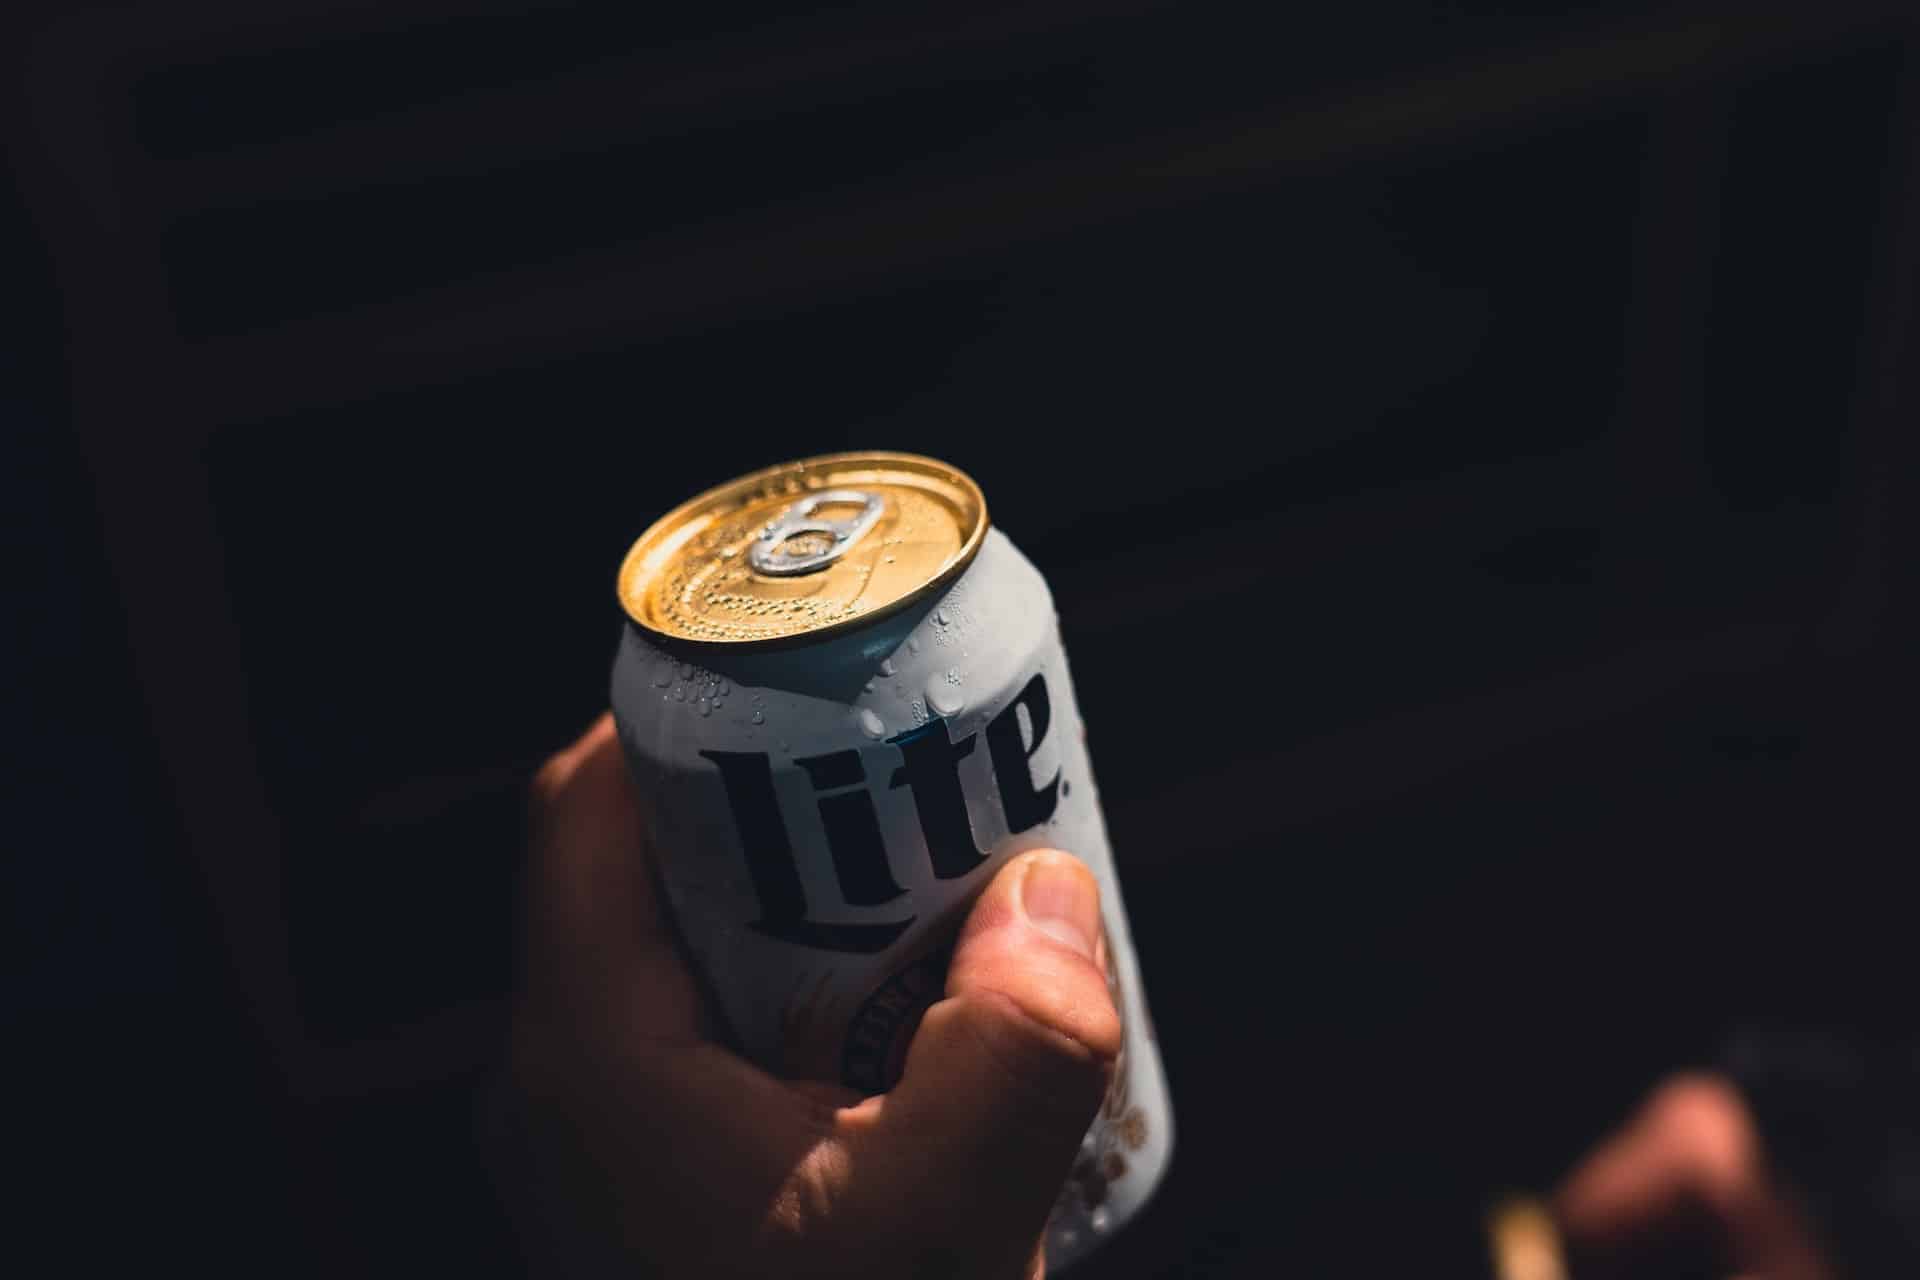 person holding a beer can - throwing a drink at someone is assault